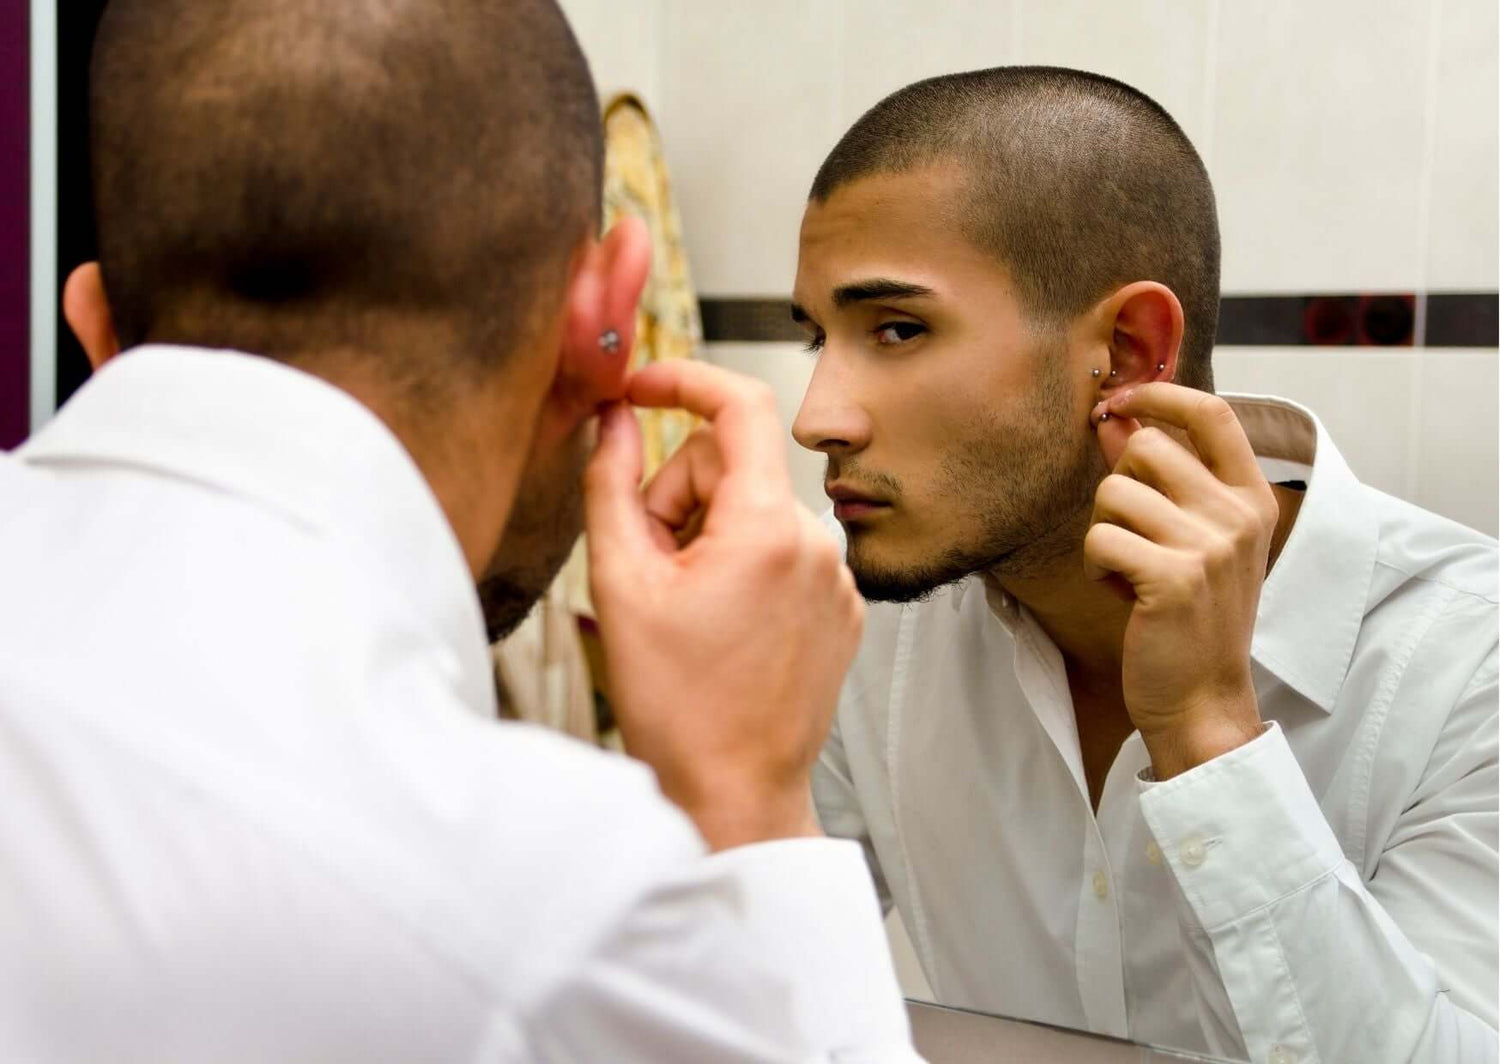 Ear Piercing Guide for Men - Dr. Piercing Aftercare